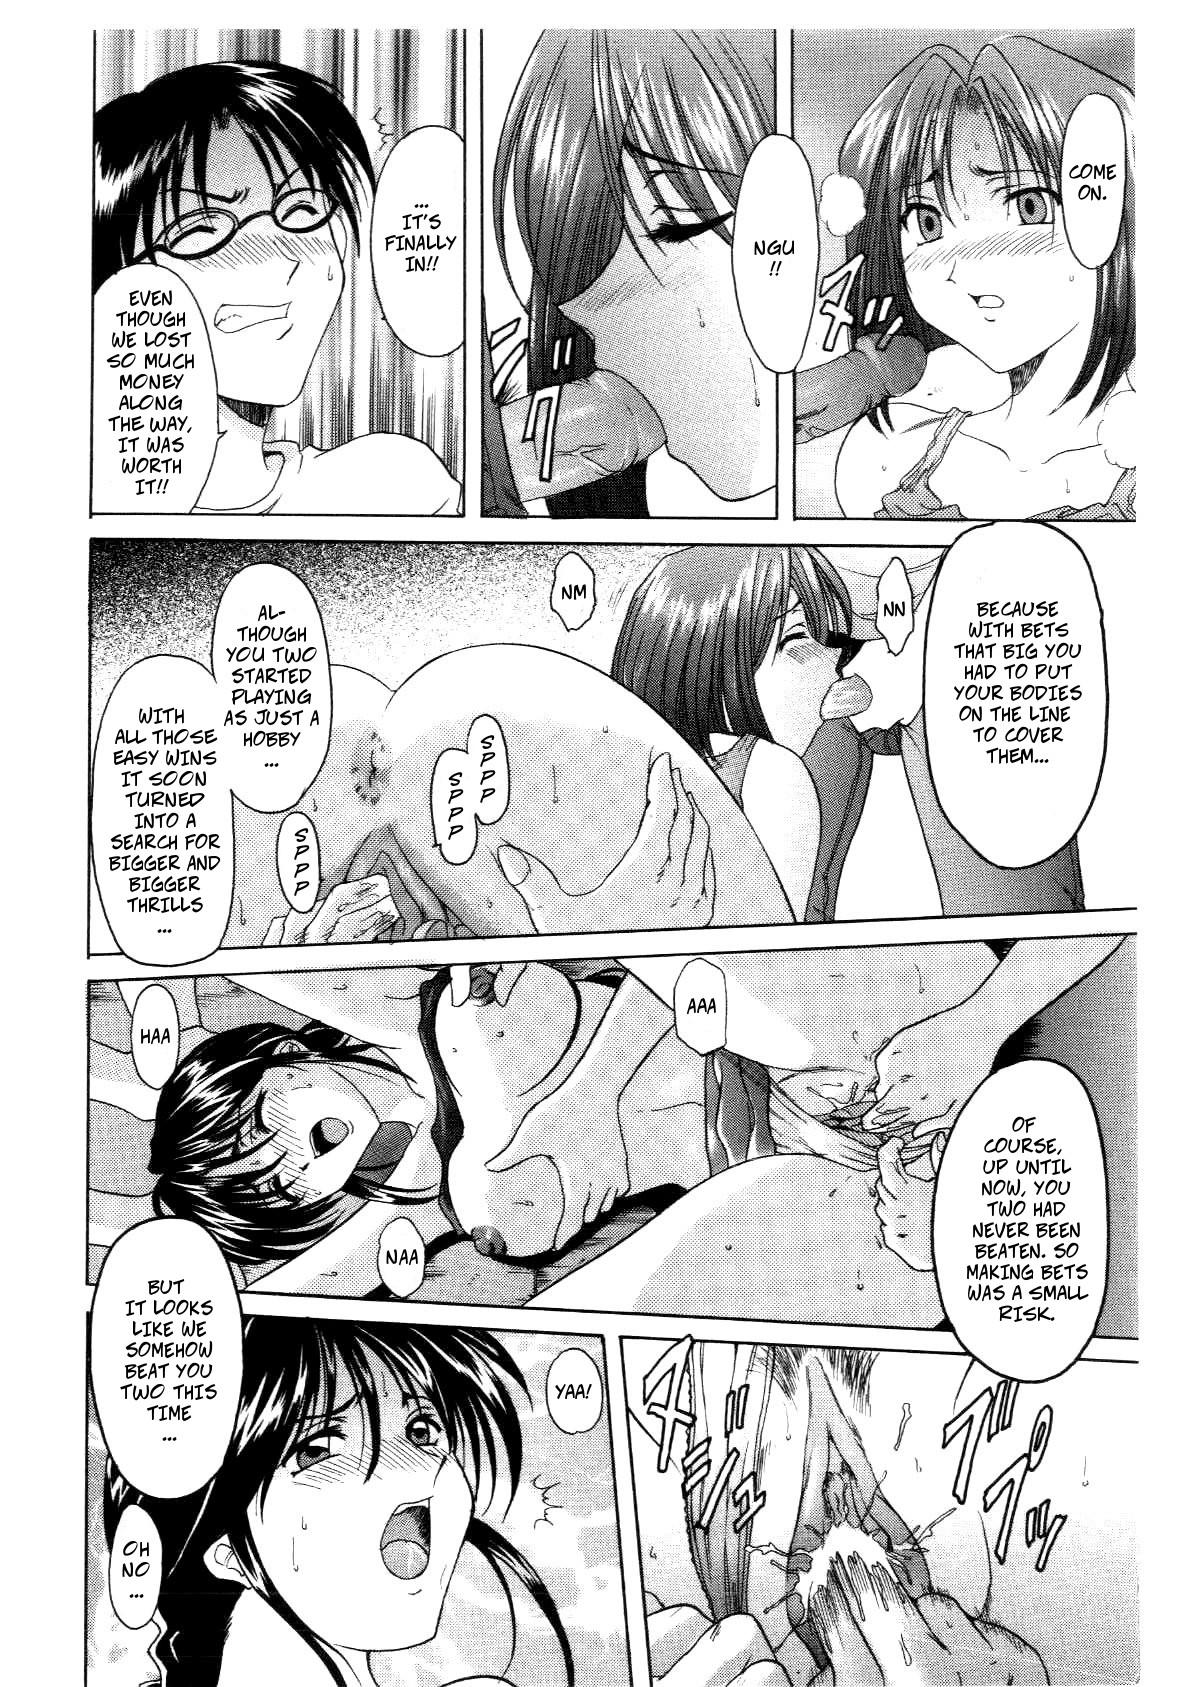 Small Boobs Give & Take - Youre under arrest Cute - Page 7